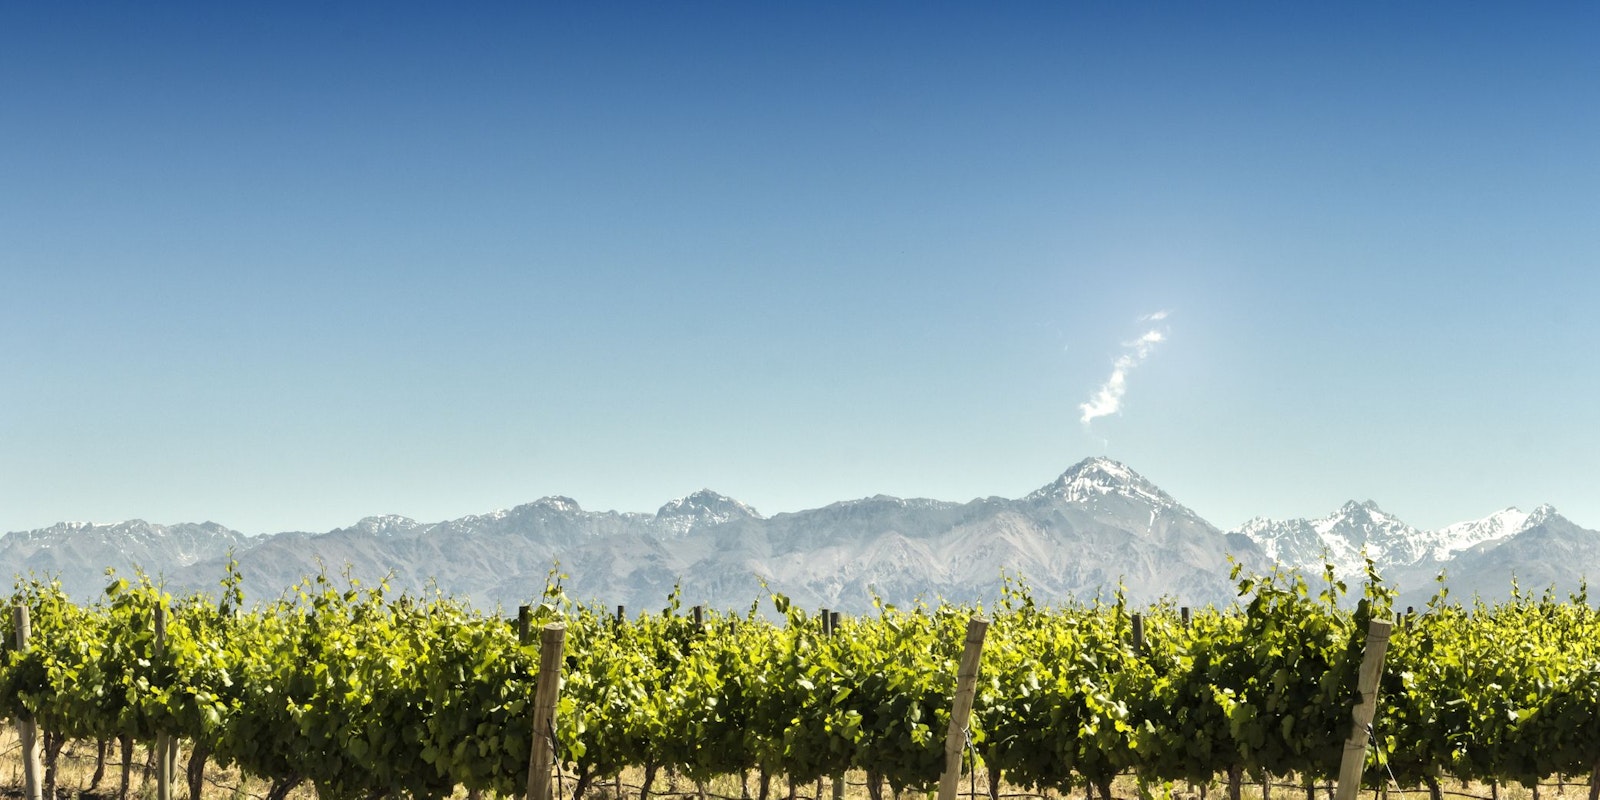 Vineyard With Mountains Background Royalty Free Image 1568313110